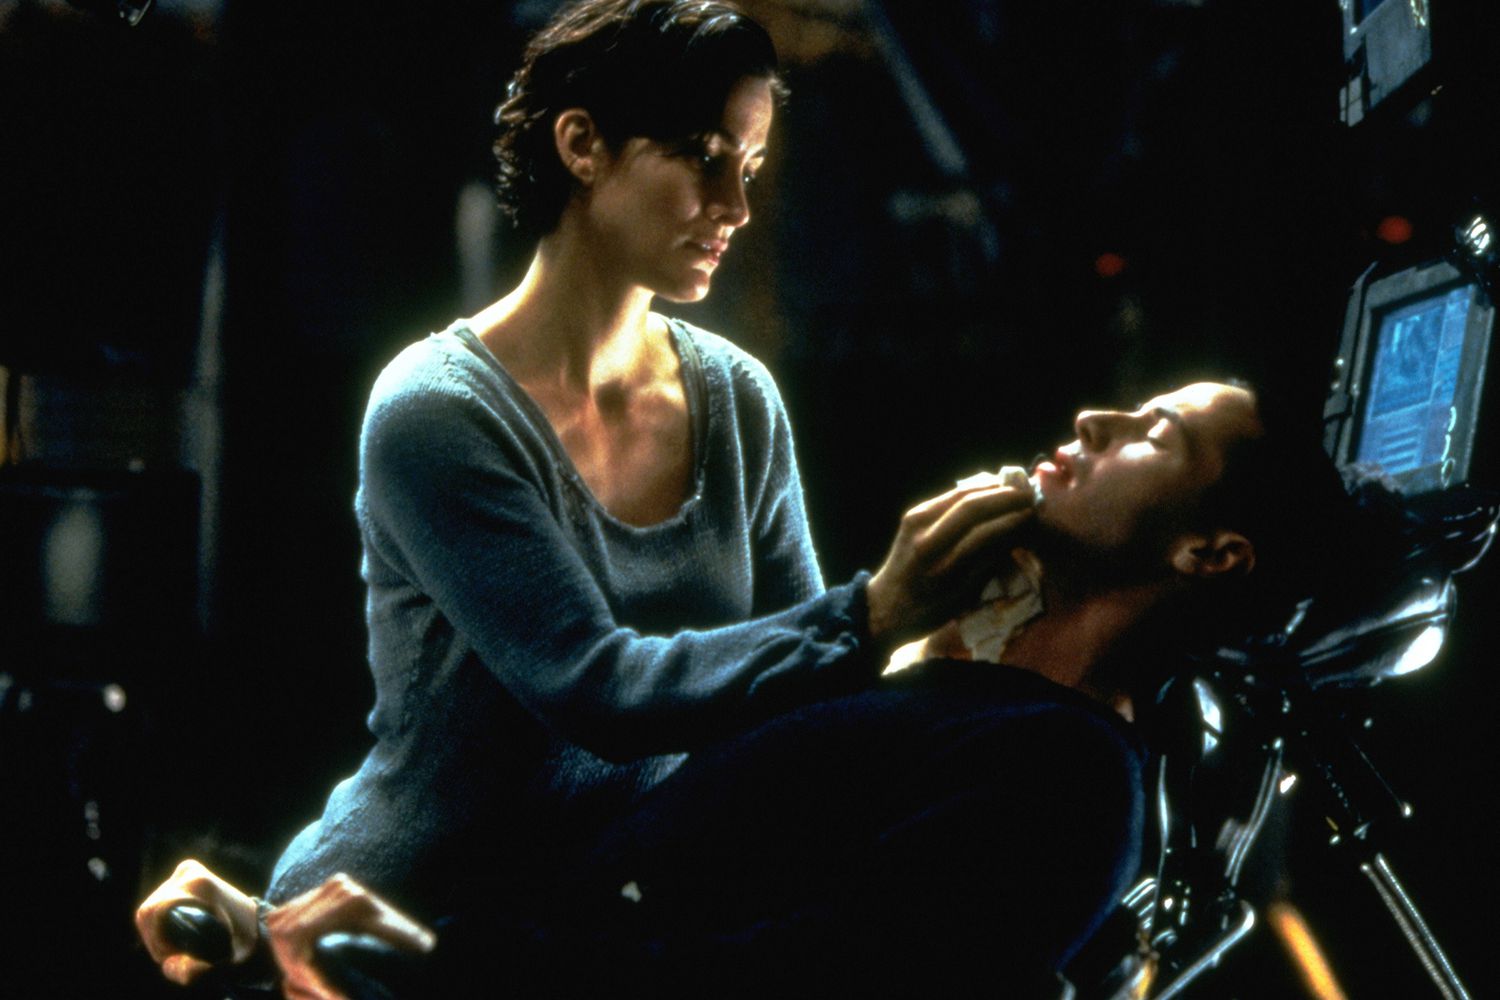 Carrie-Anne Moss and Keanu Reeves in The Matrix (Photo by Ronald Siemoneit/Sygma/Sygma via Getty Images)